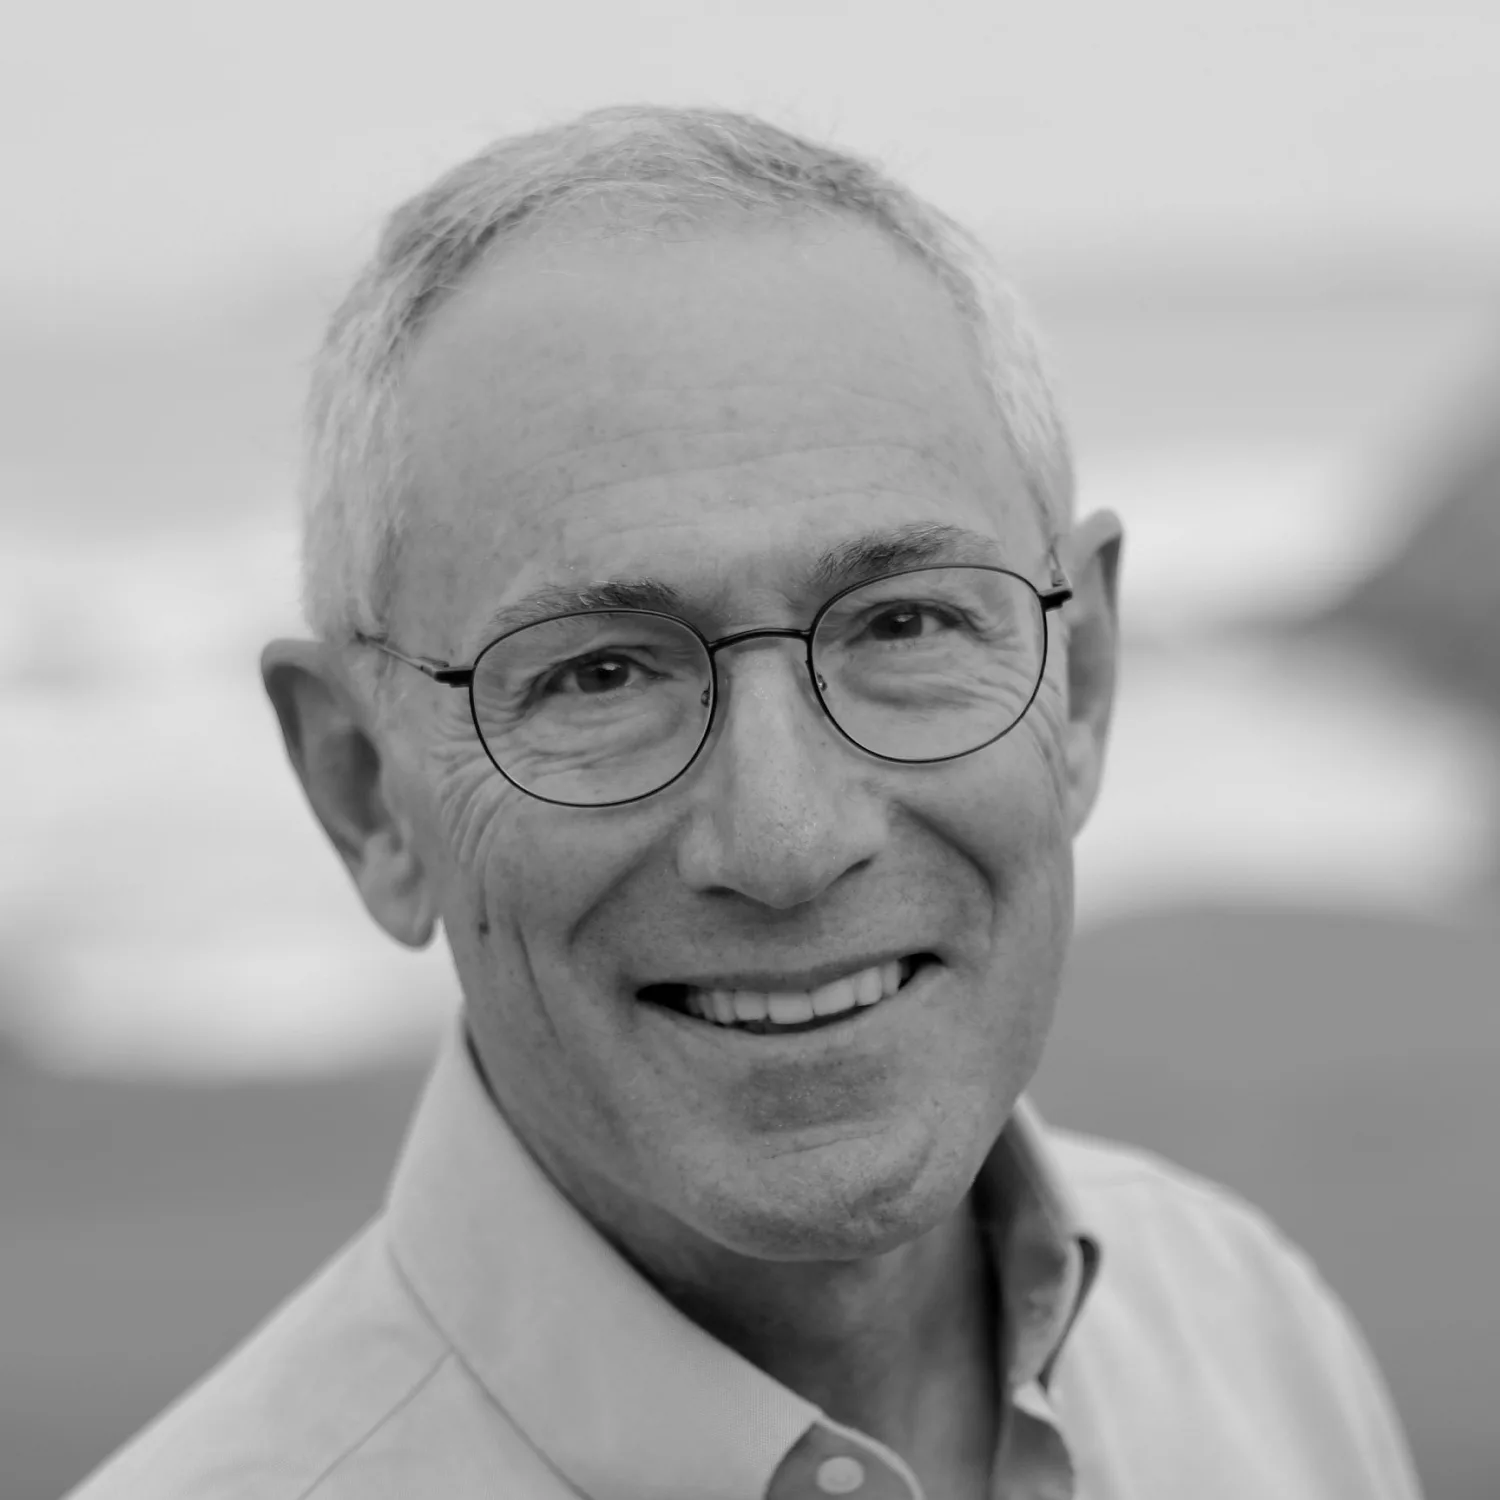 A portrait of Tom Insel